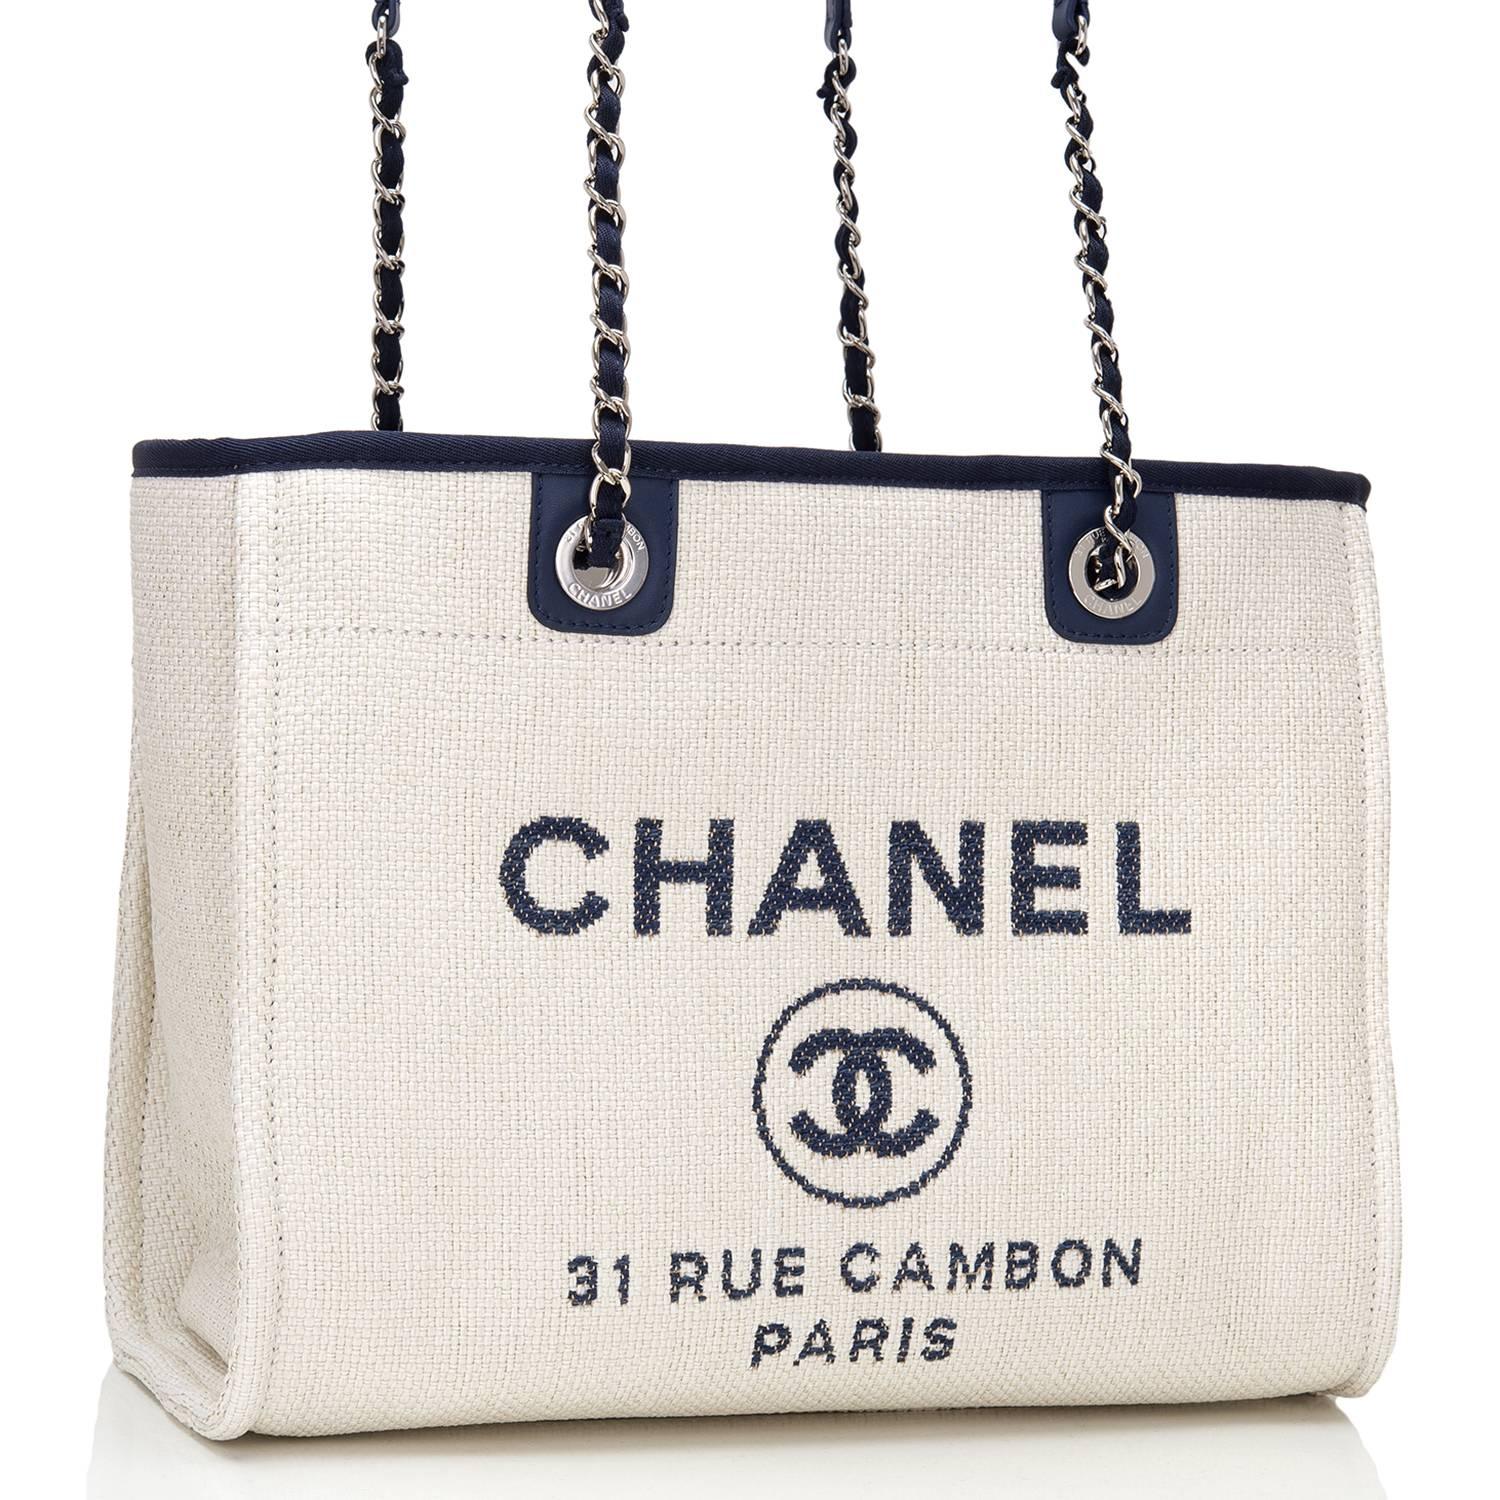 Chanel Small Deauville Canvas Tote of white canvas, navy leather trim and silver tone hardware.

This bag features the signature CC logo in a circle with the brand CHANEL above it and the Paris flagship store address -- 